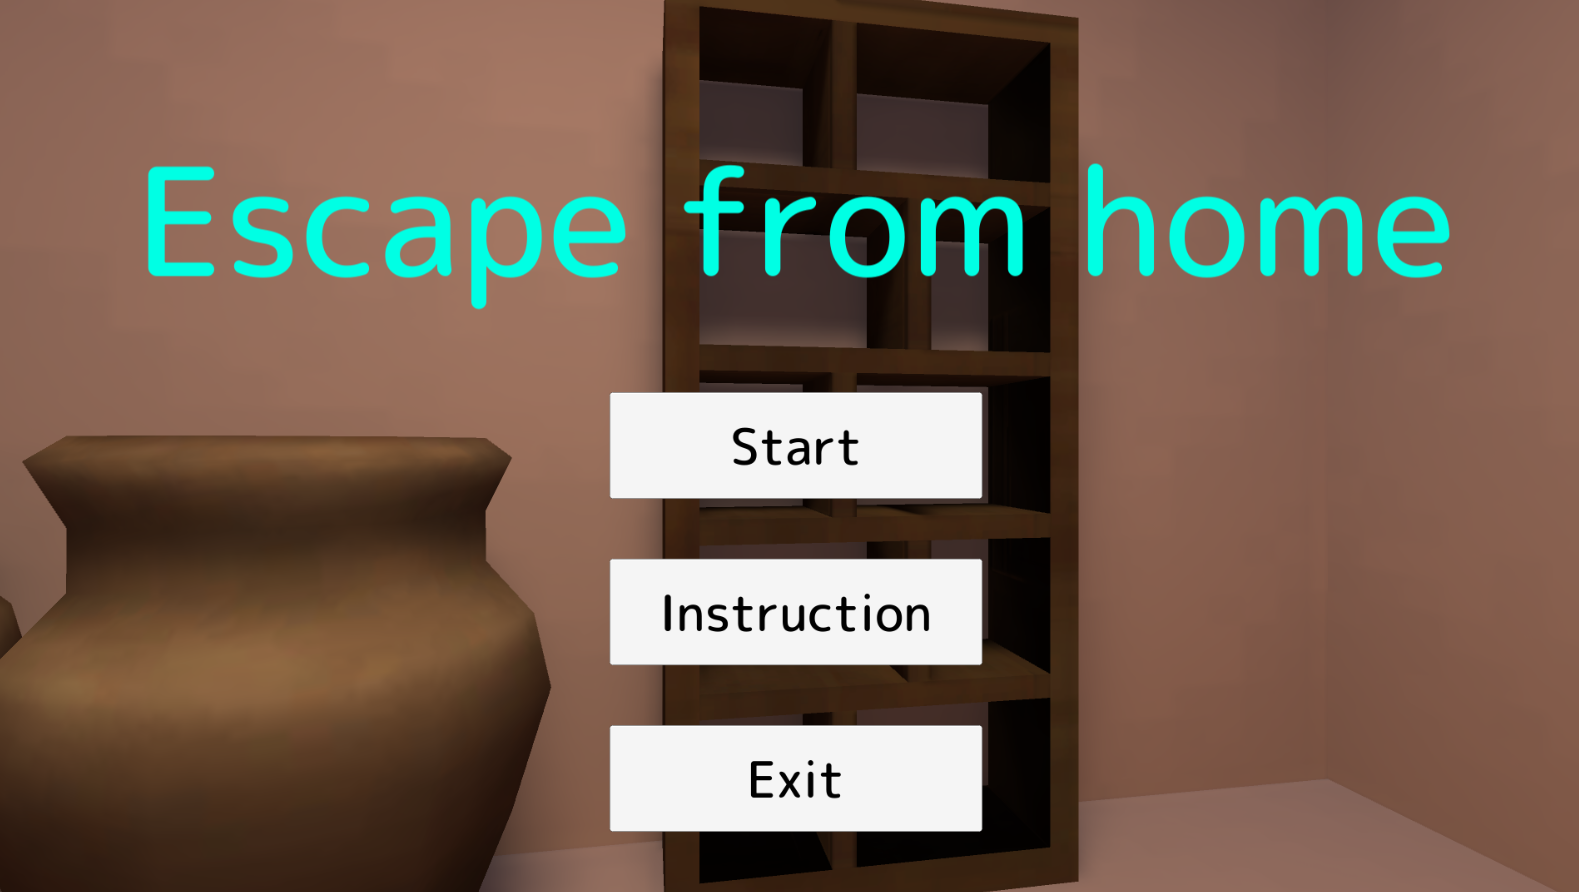 Escape_from_home